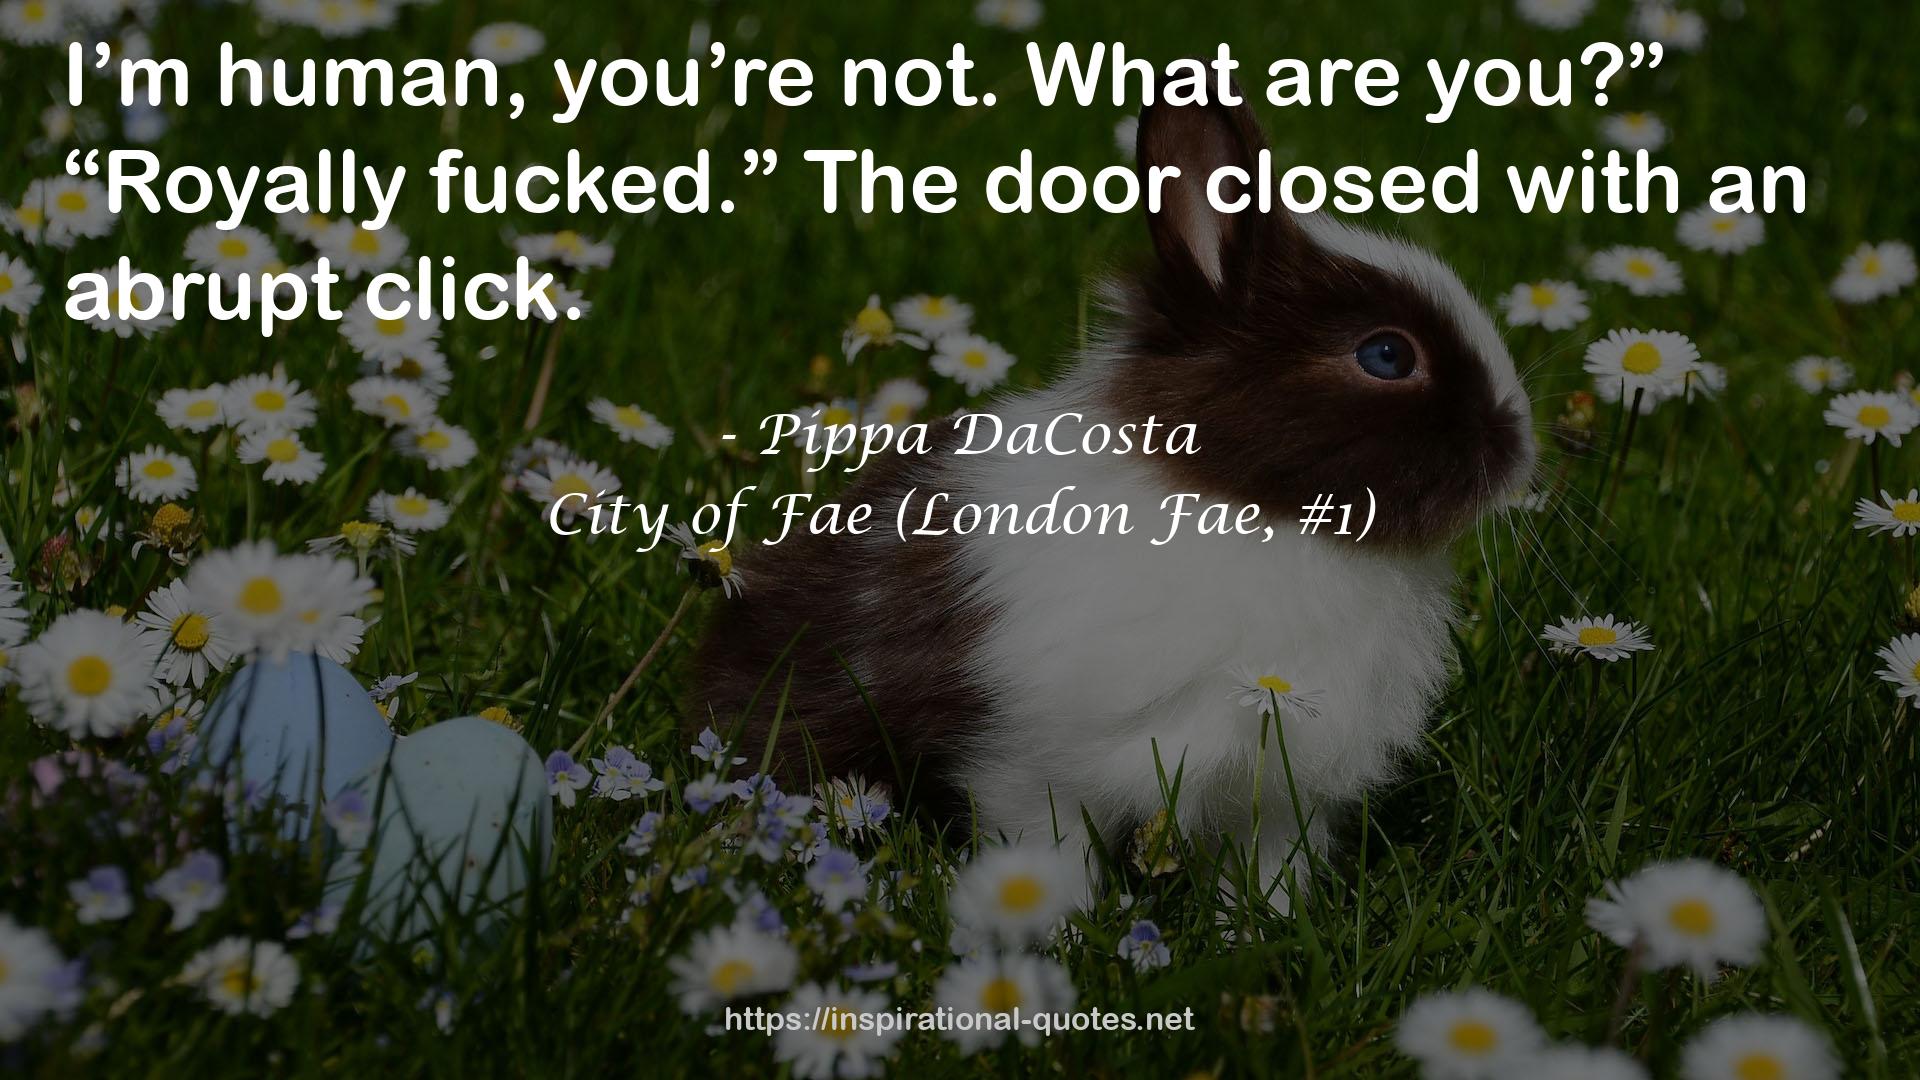 City of Fae (London Fae, #1) QUOTES